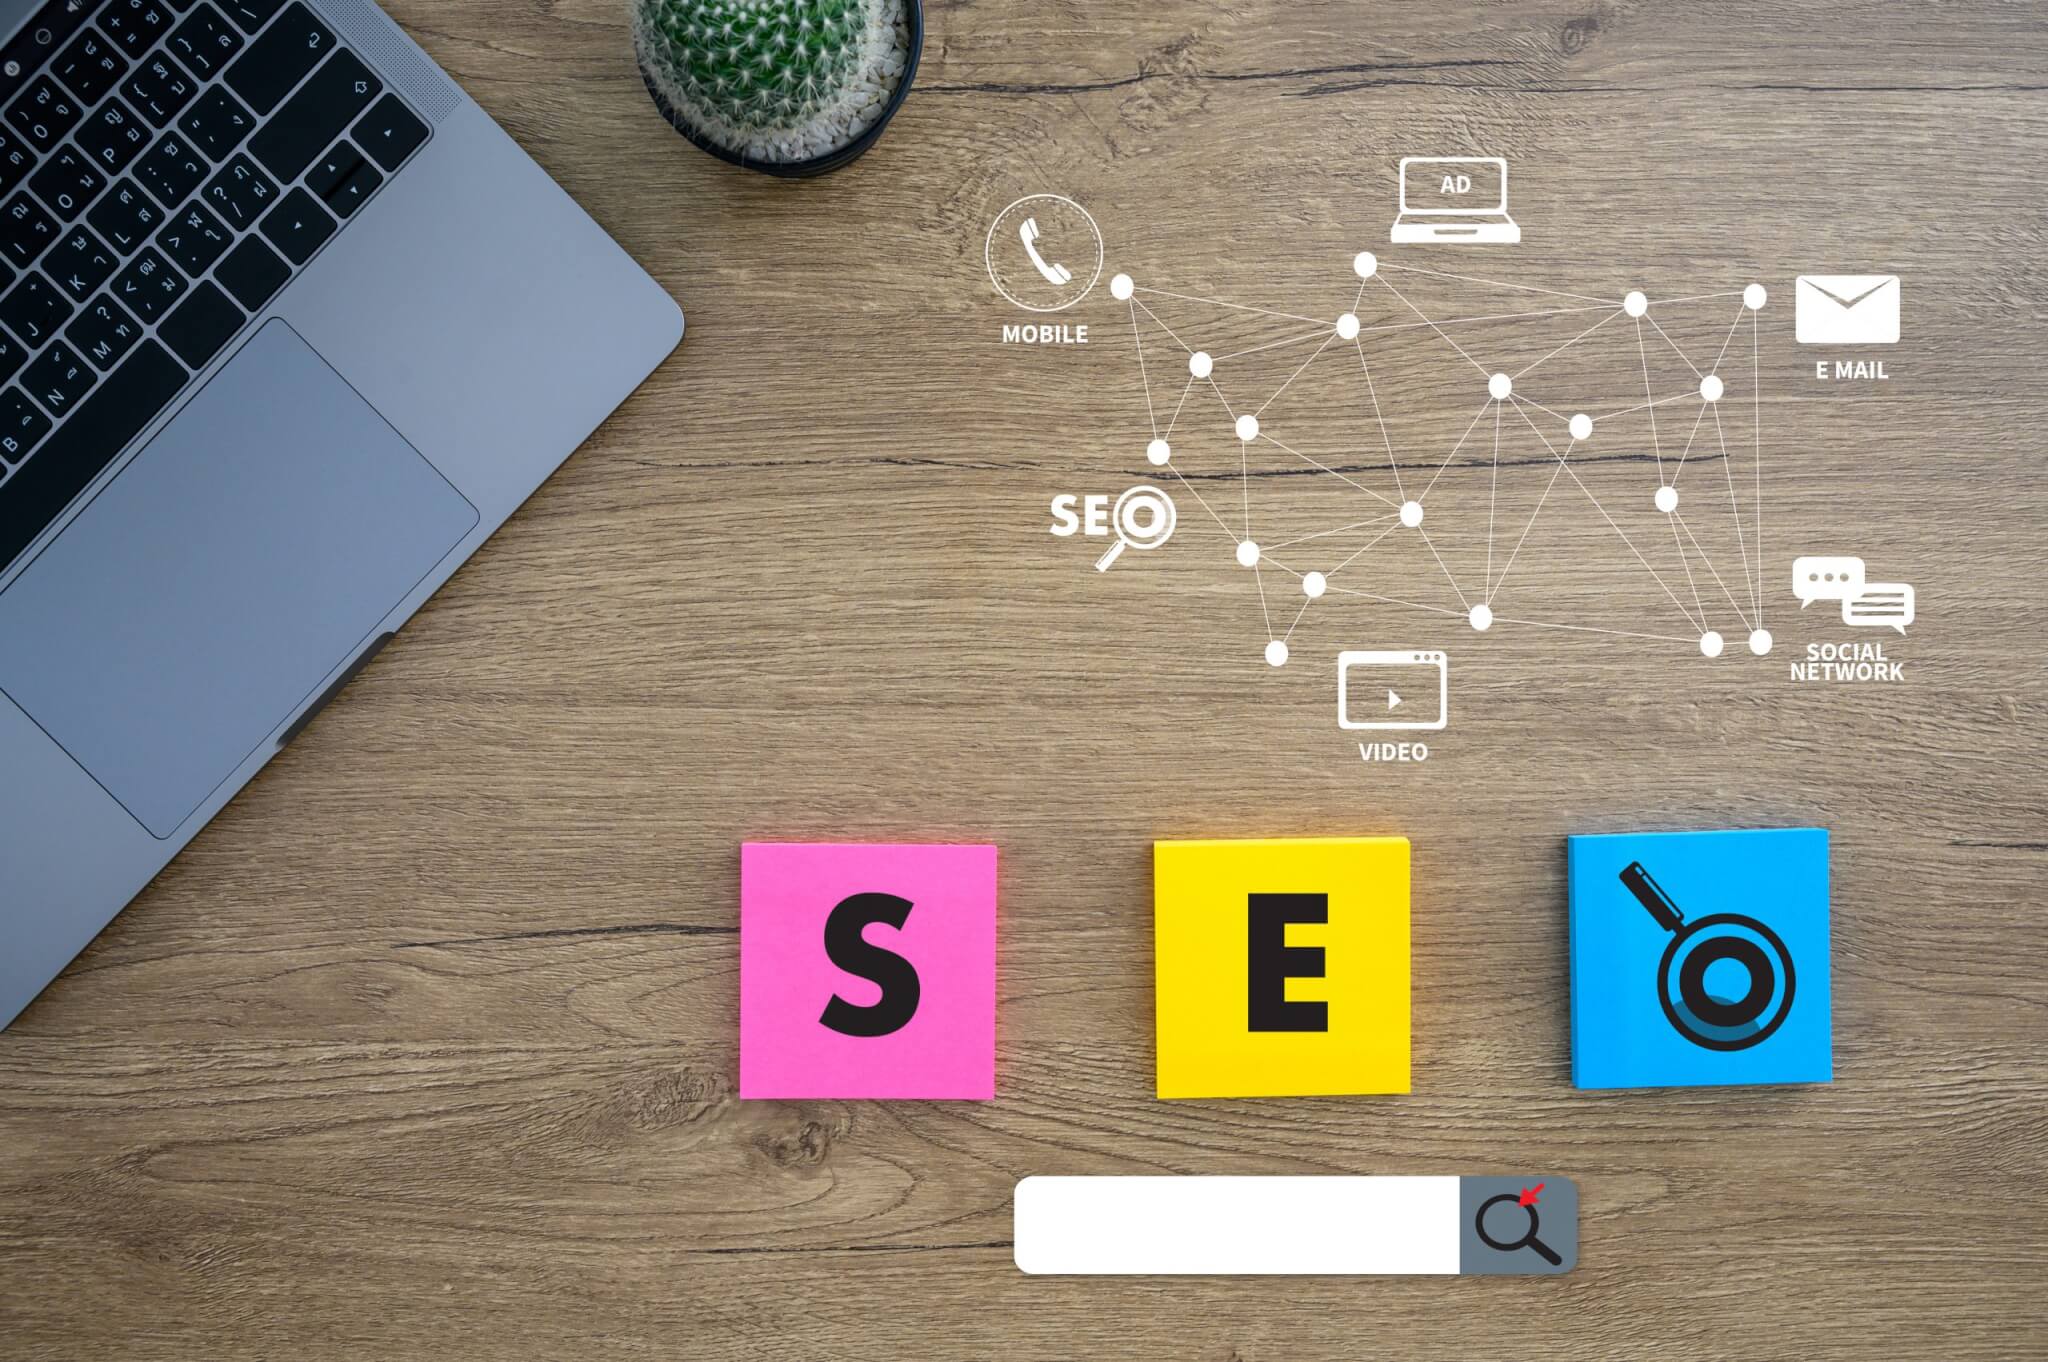 Common mistakes that affect SEO